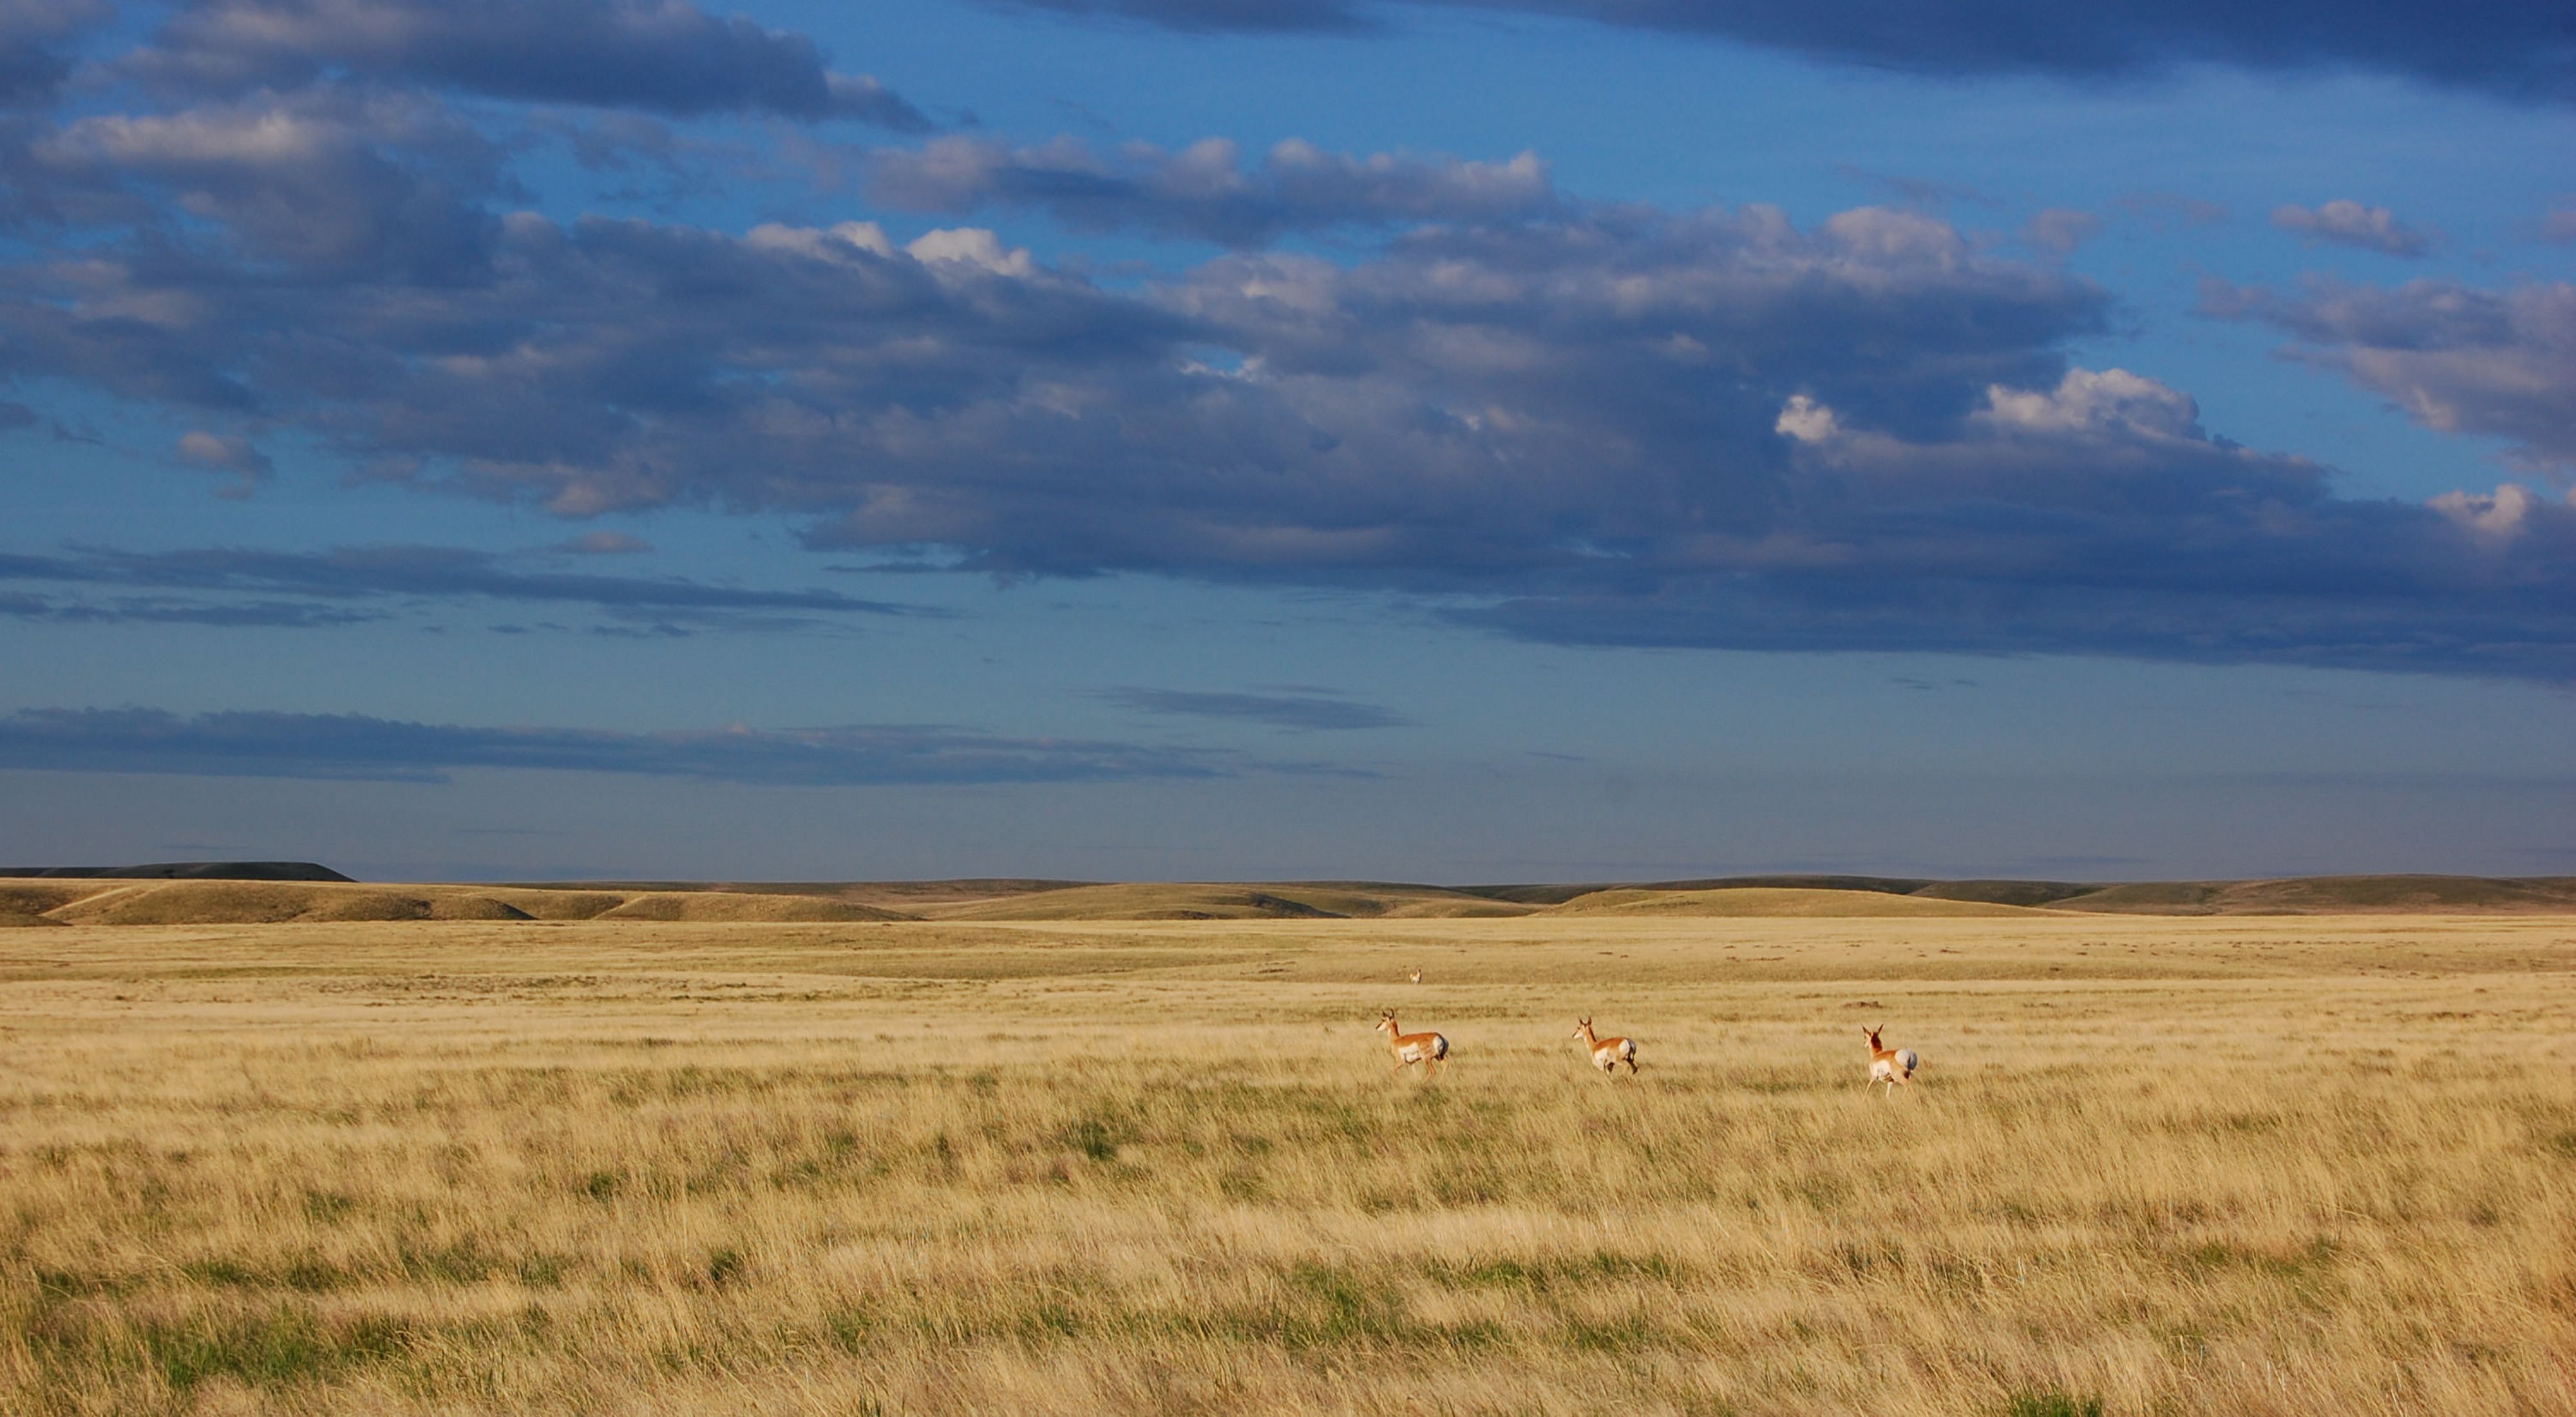 Northern Great Plains.